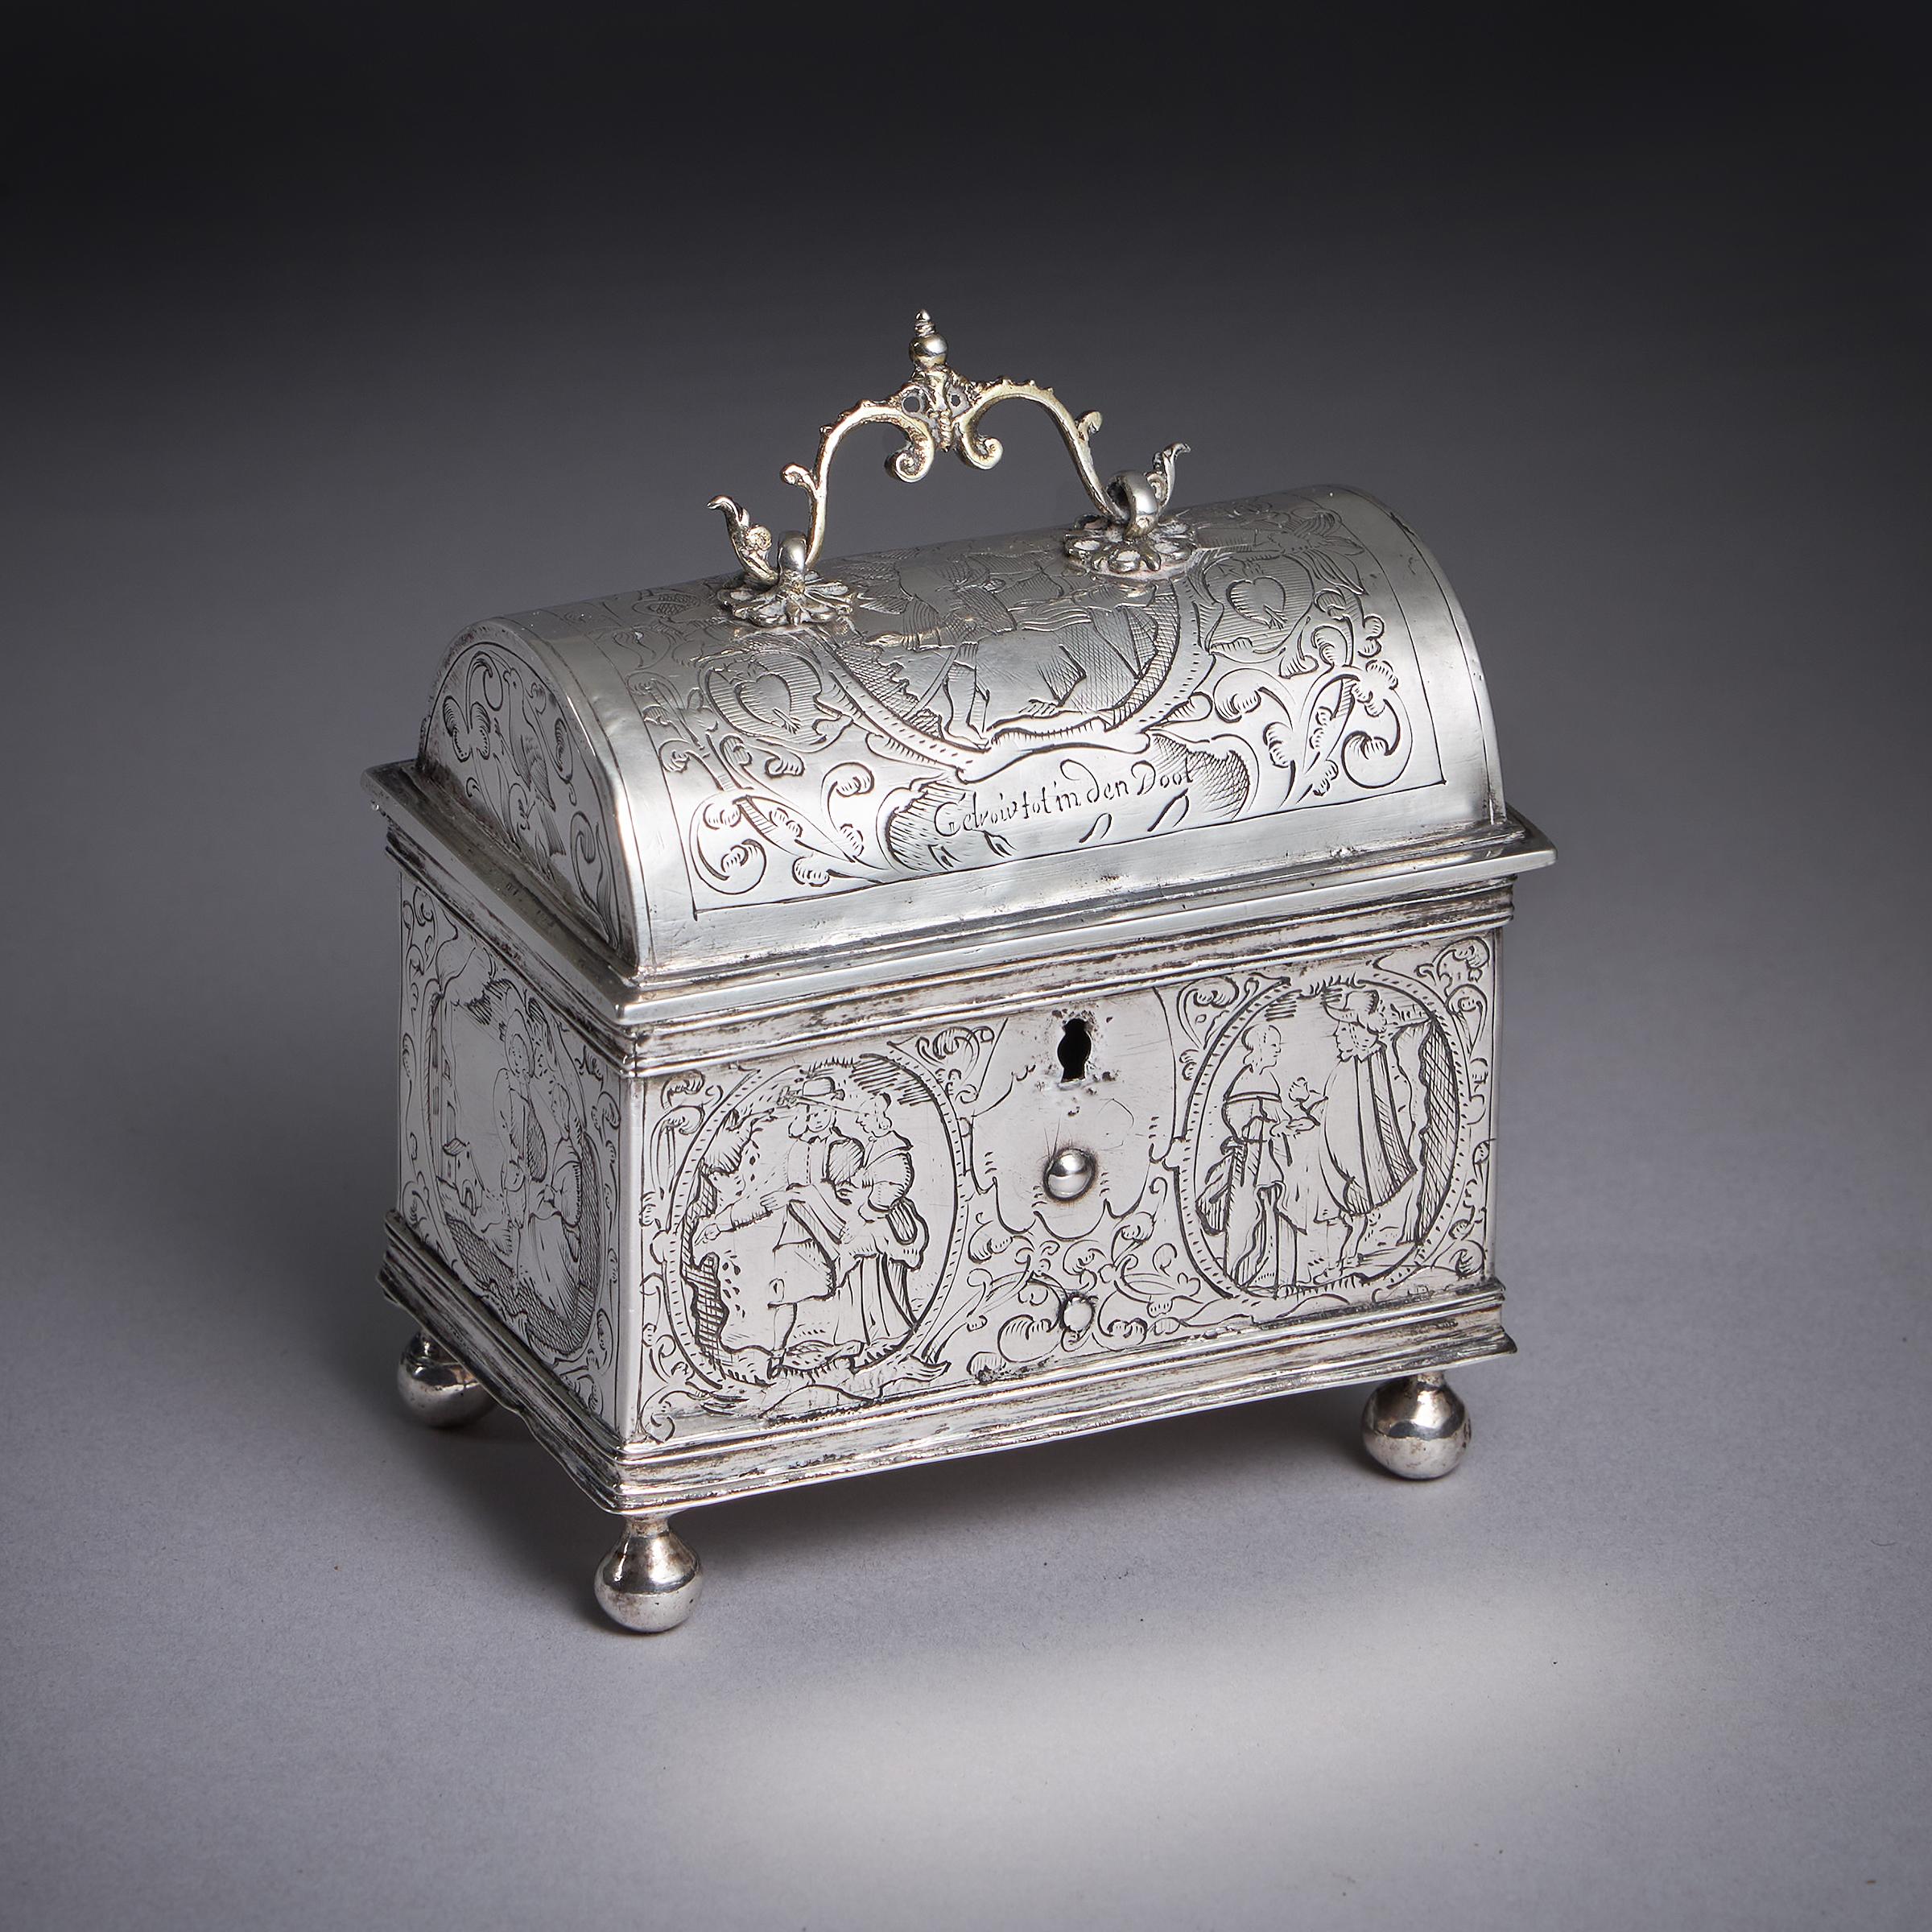 A museum-grade mid-17th century Dutch silver marriage casket or knottekistje, circa 1660.

Raised on solid silver bun feet the miniature casket is profusely engraved to all faces depicting a courting couple and architecture entwined in scrolling